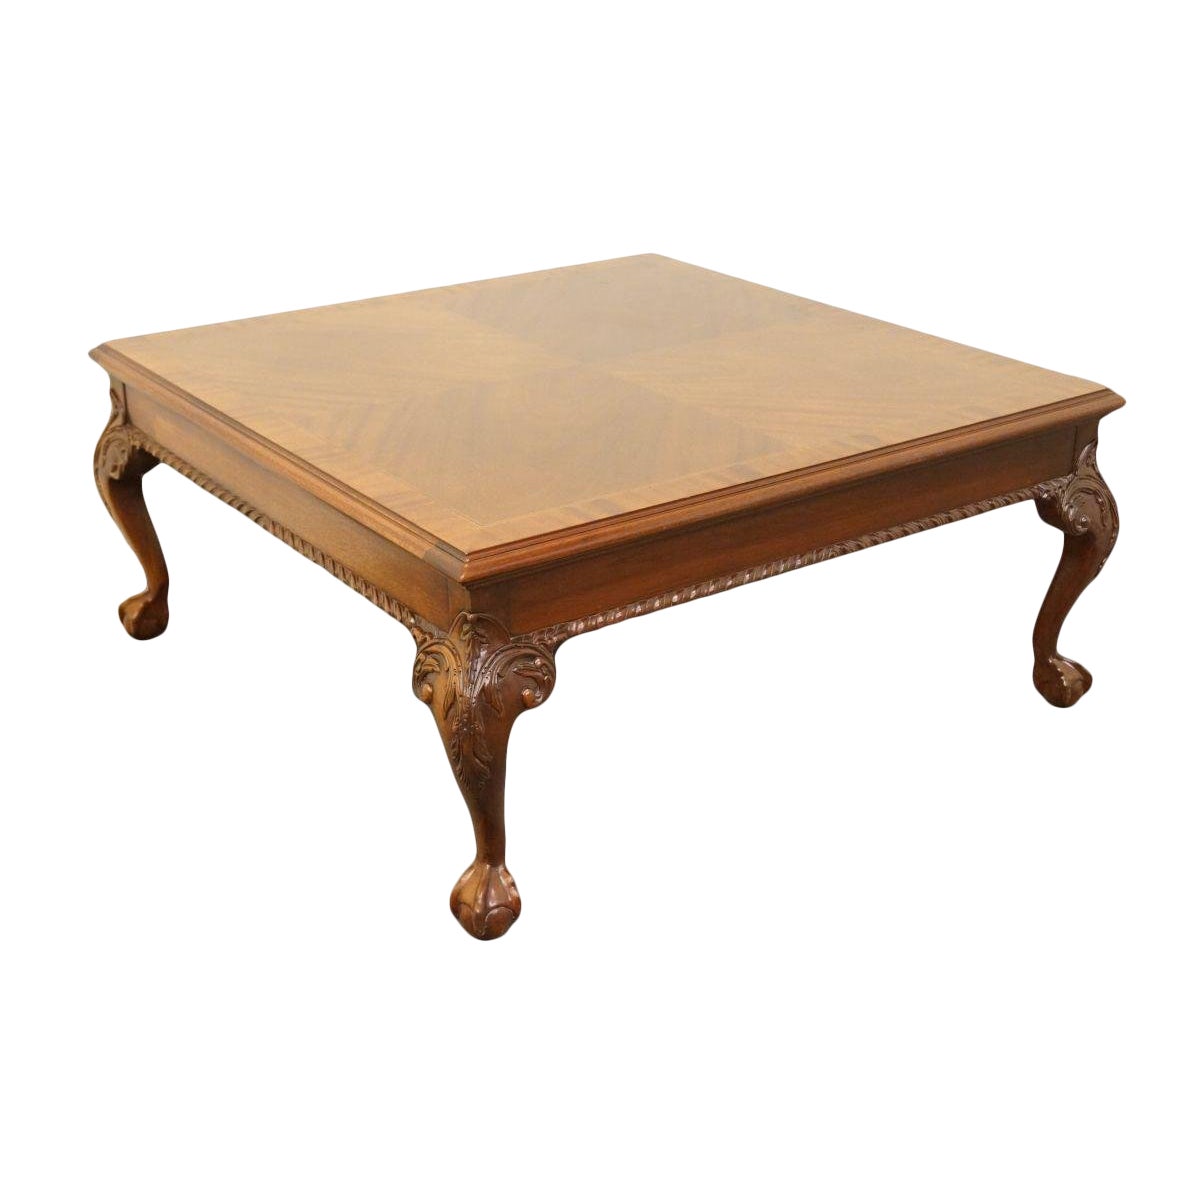 chippendale style high end banded bookmatched mahogany coffee table tables chairish merry products dog crate large ethan allen court dining target wood accent royal italian